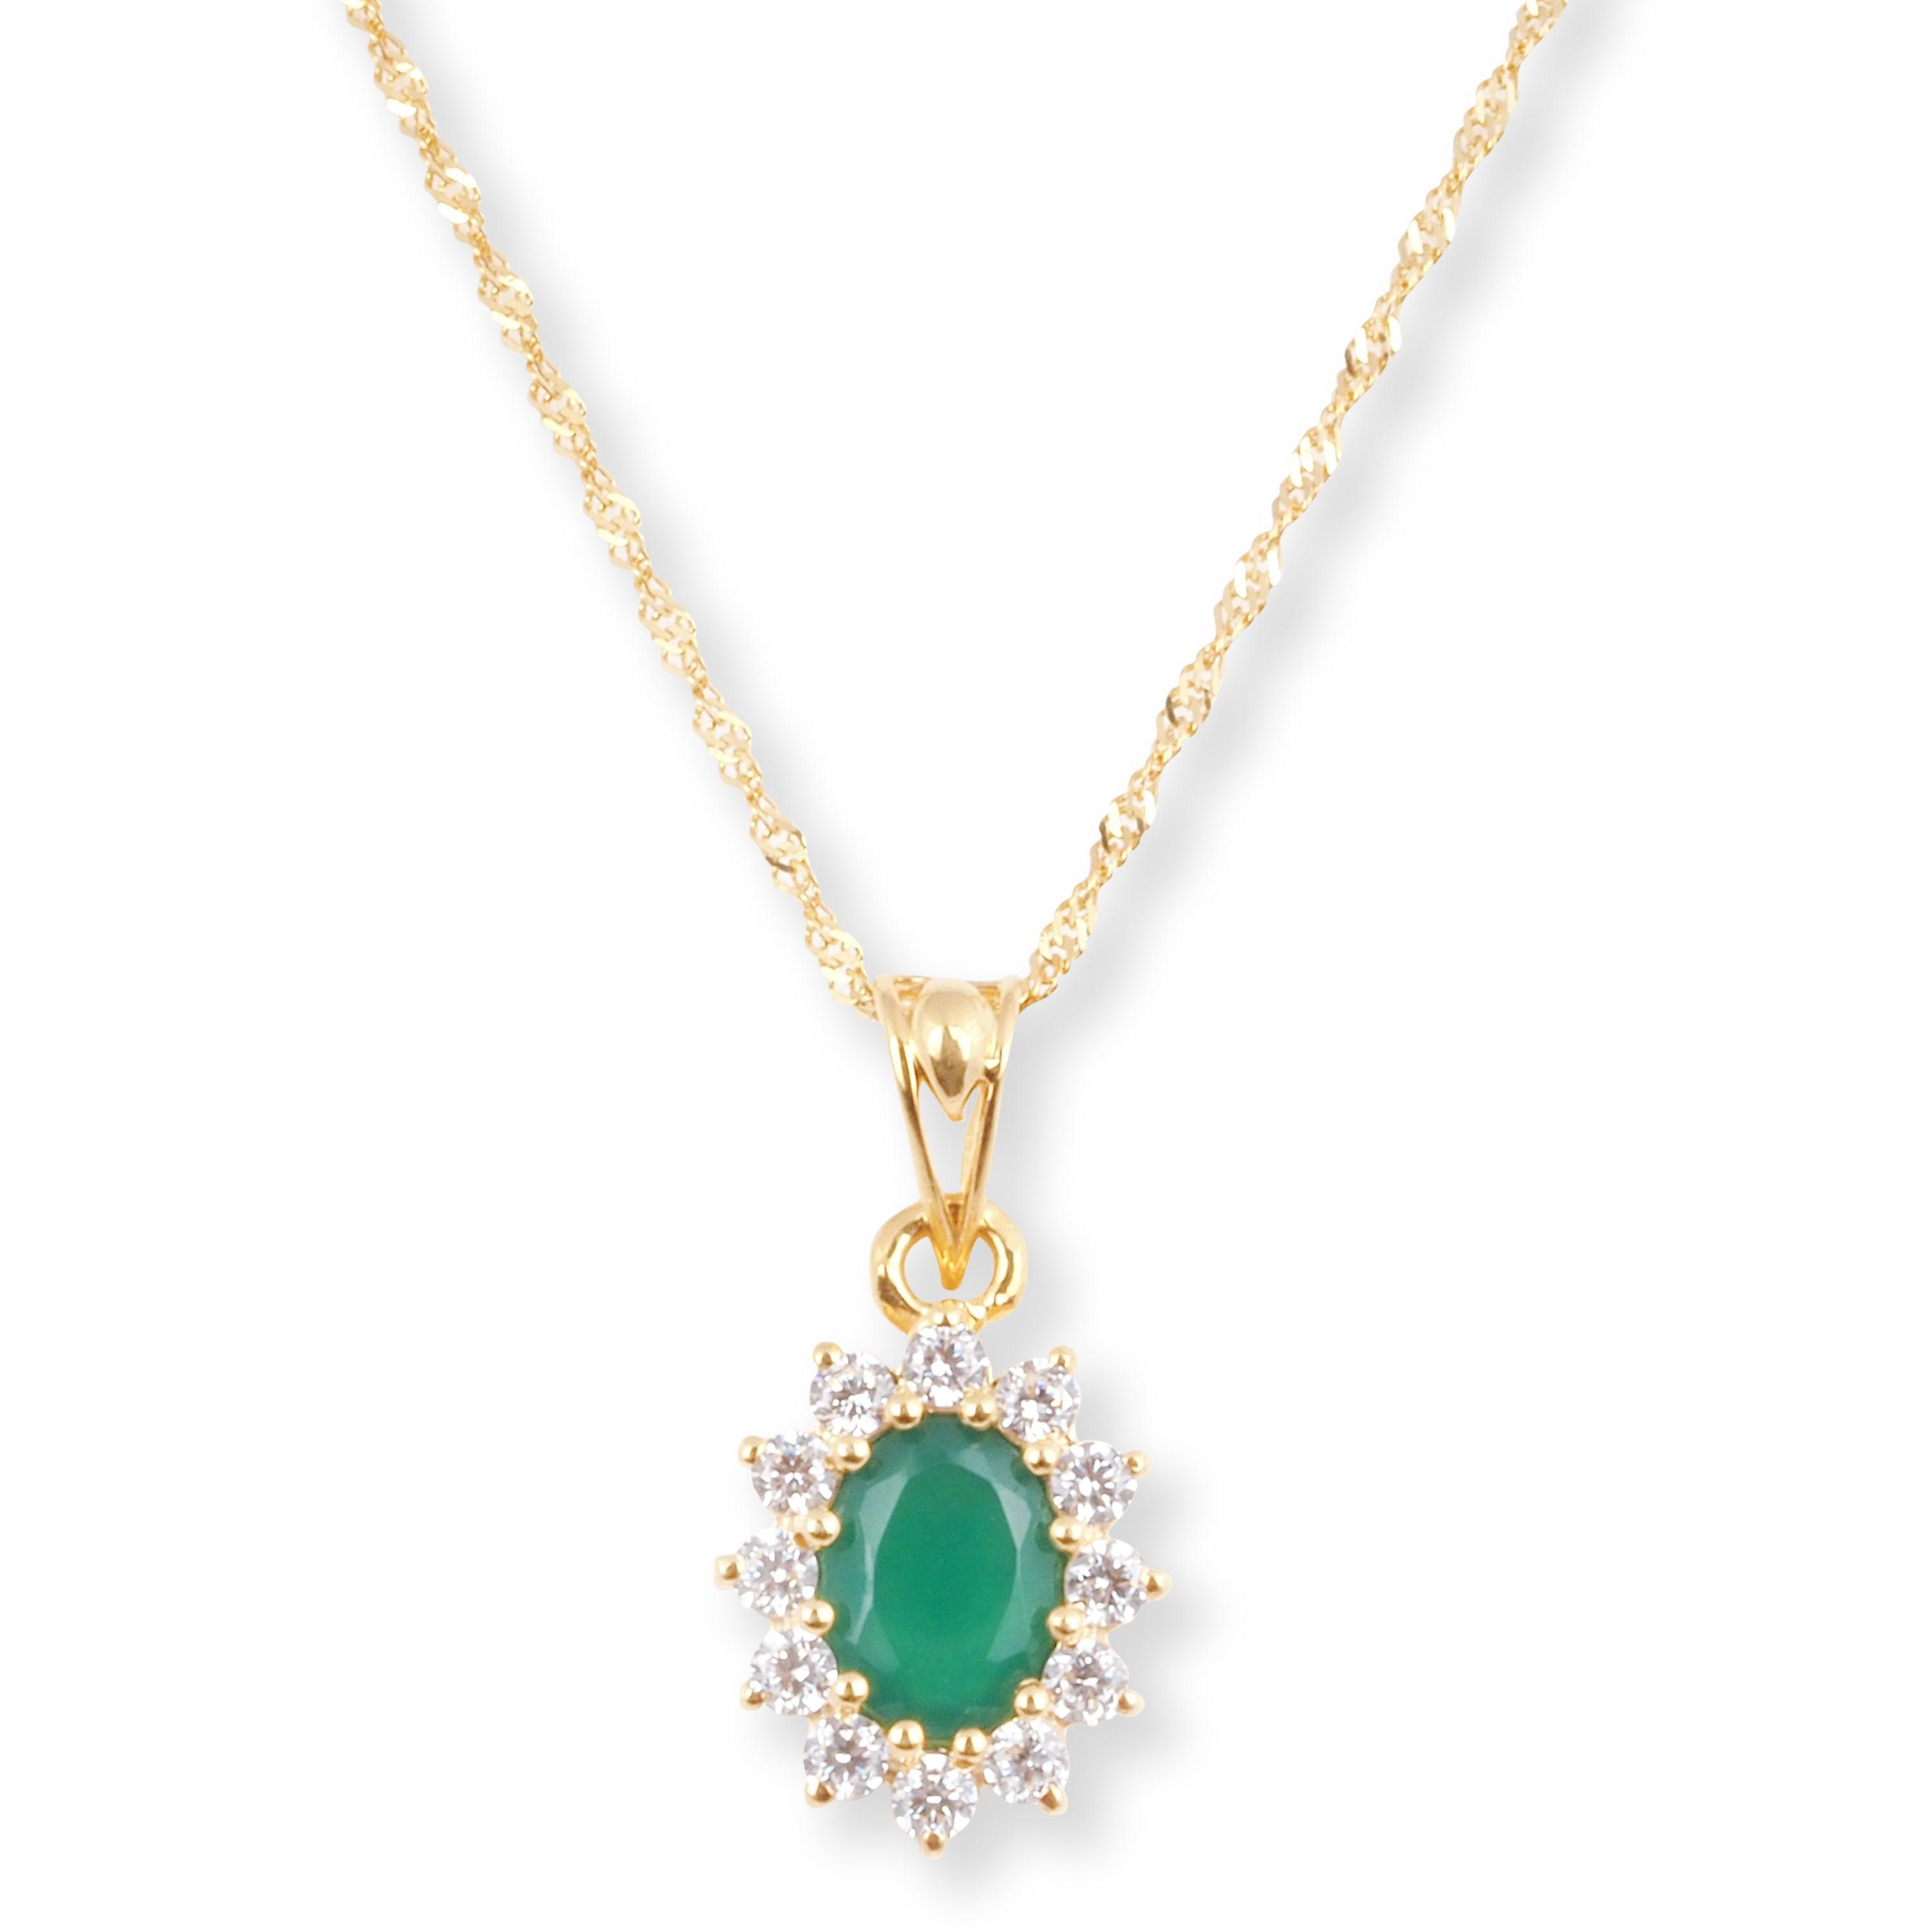 22ct Yellow Gold Pendant Set with Green Stone an Cubic Zirconia Stones P-8003 E-8003A - Minar Jewellers